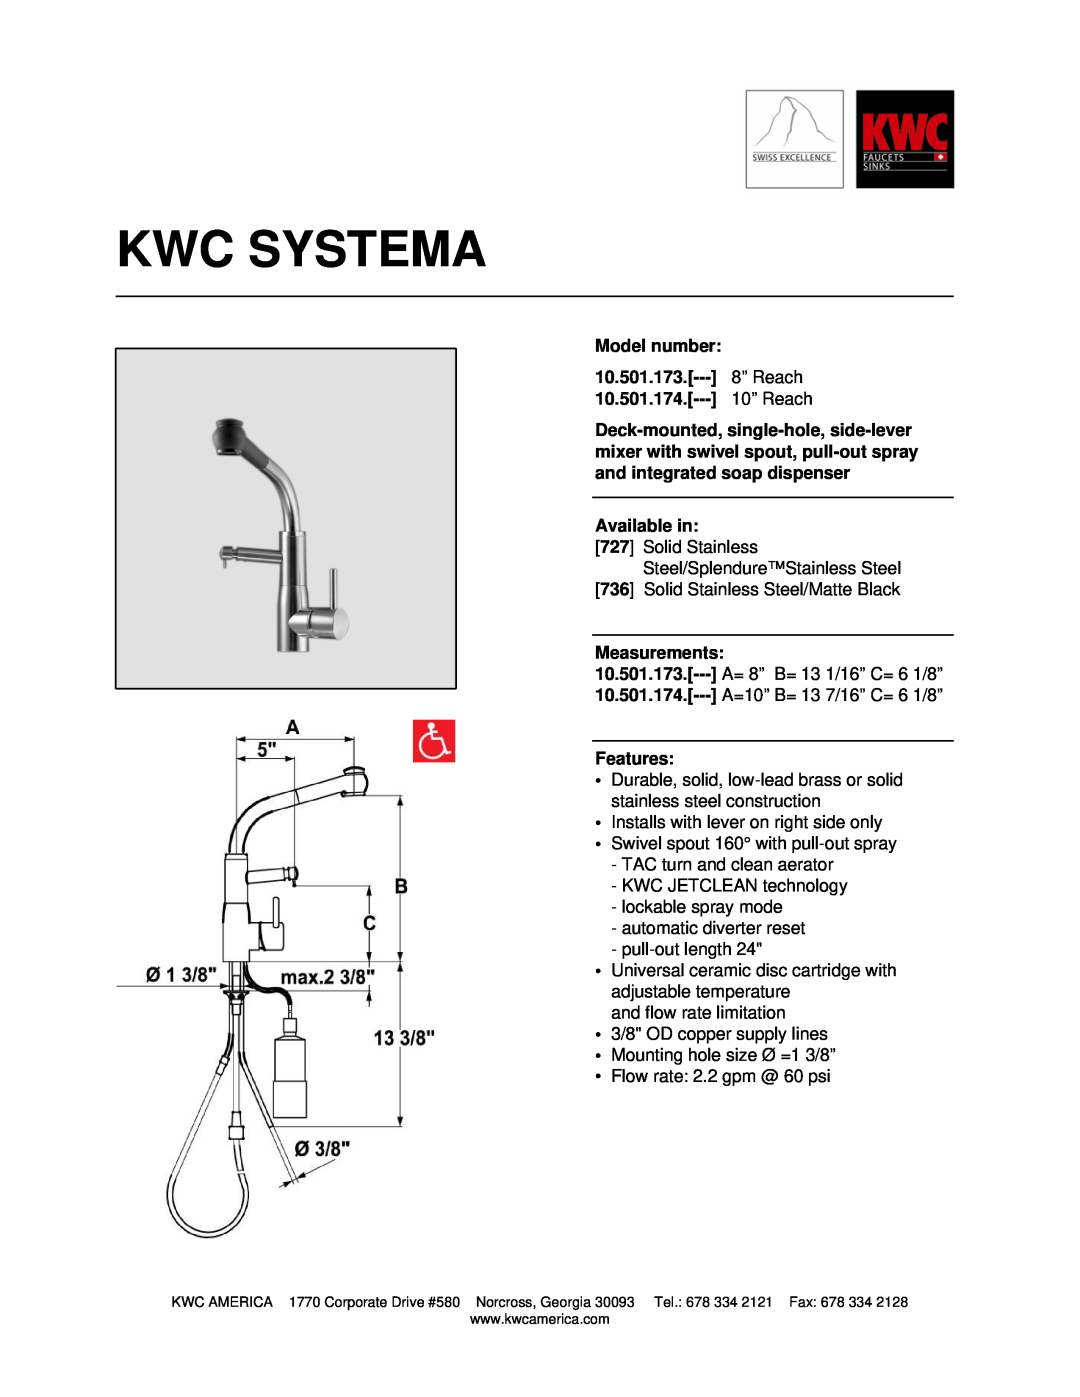 KWC manual Kwc Systema, Model number 10.501.173.--- 8” Reach, 10” Reach, Available in, Measurements, Features 